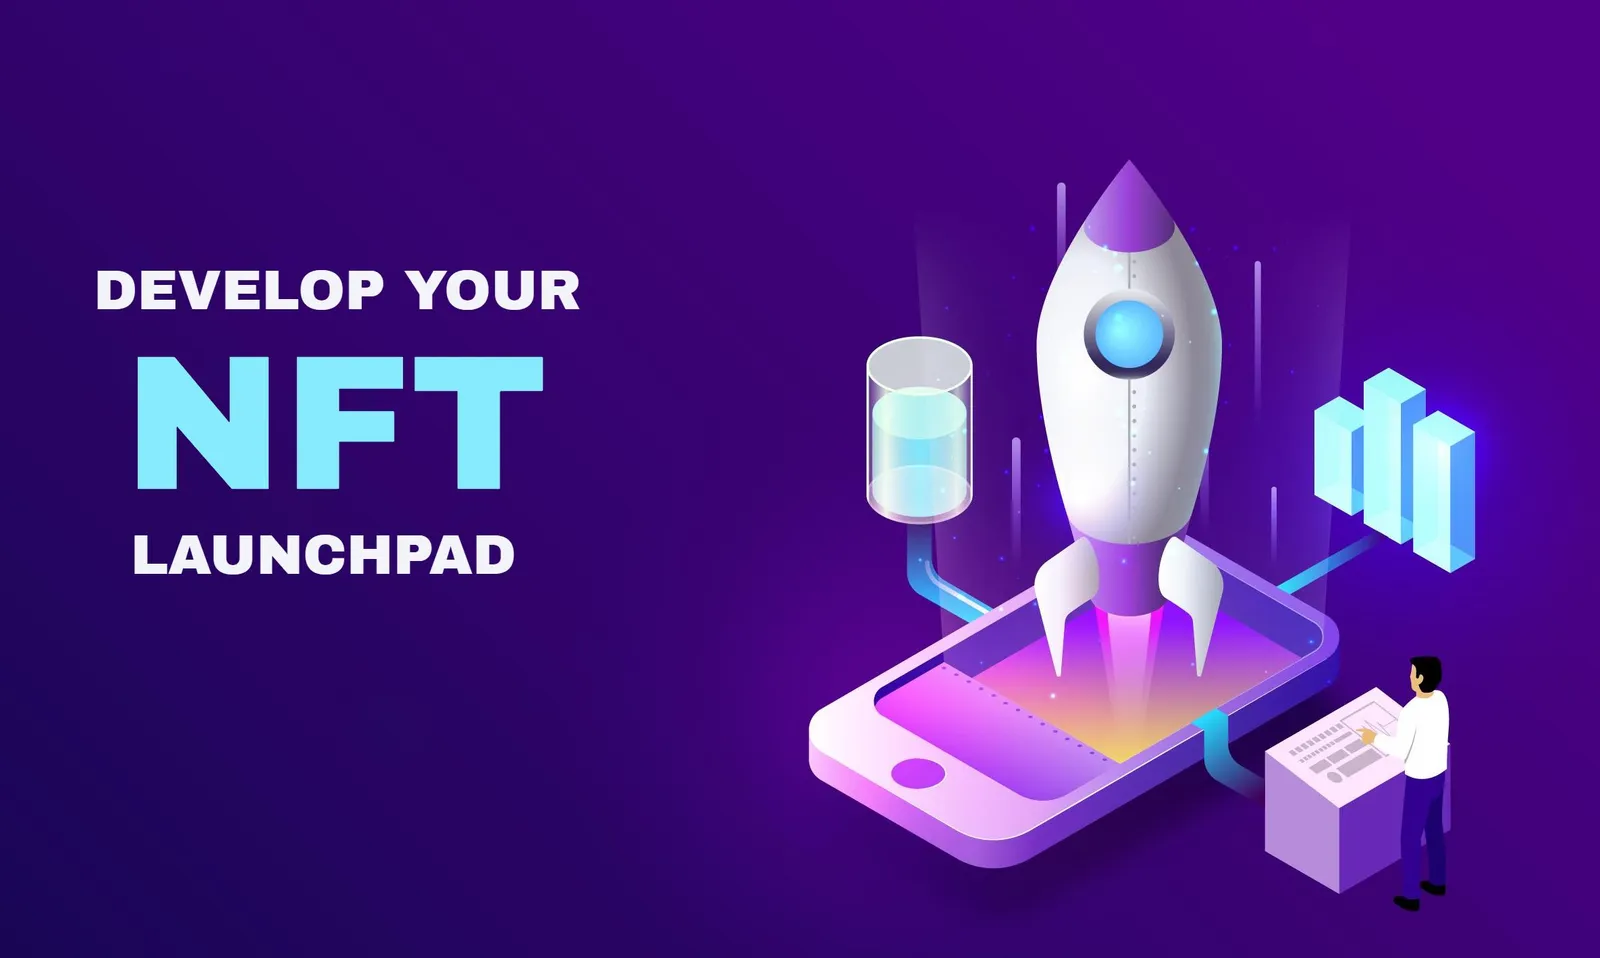 Develop your own NFT Launchpad